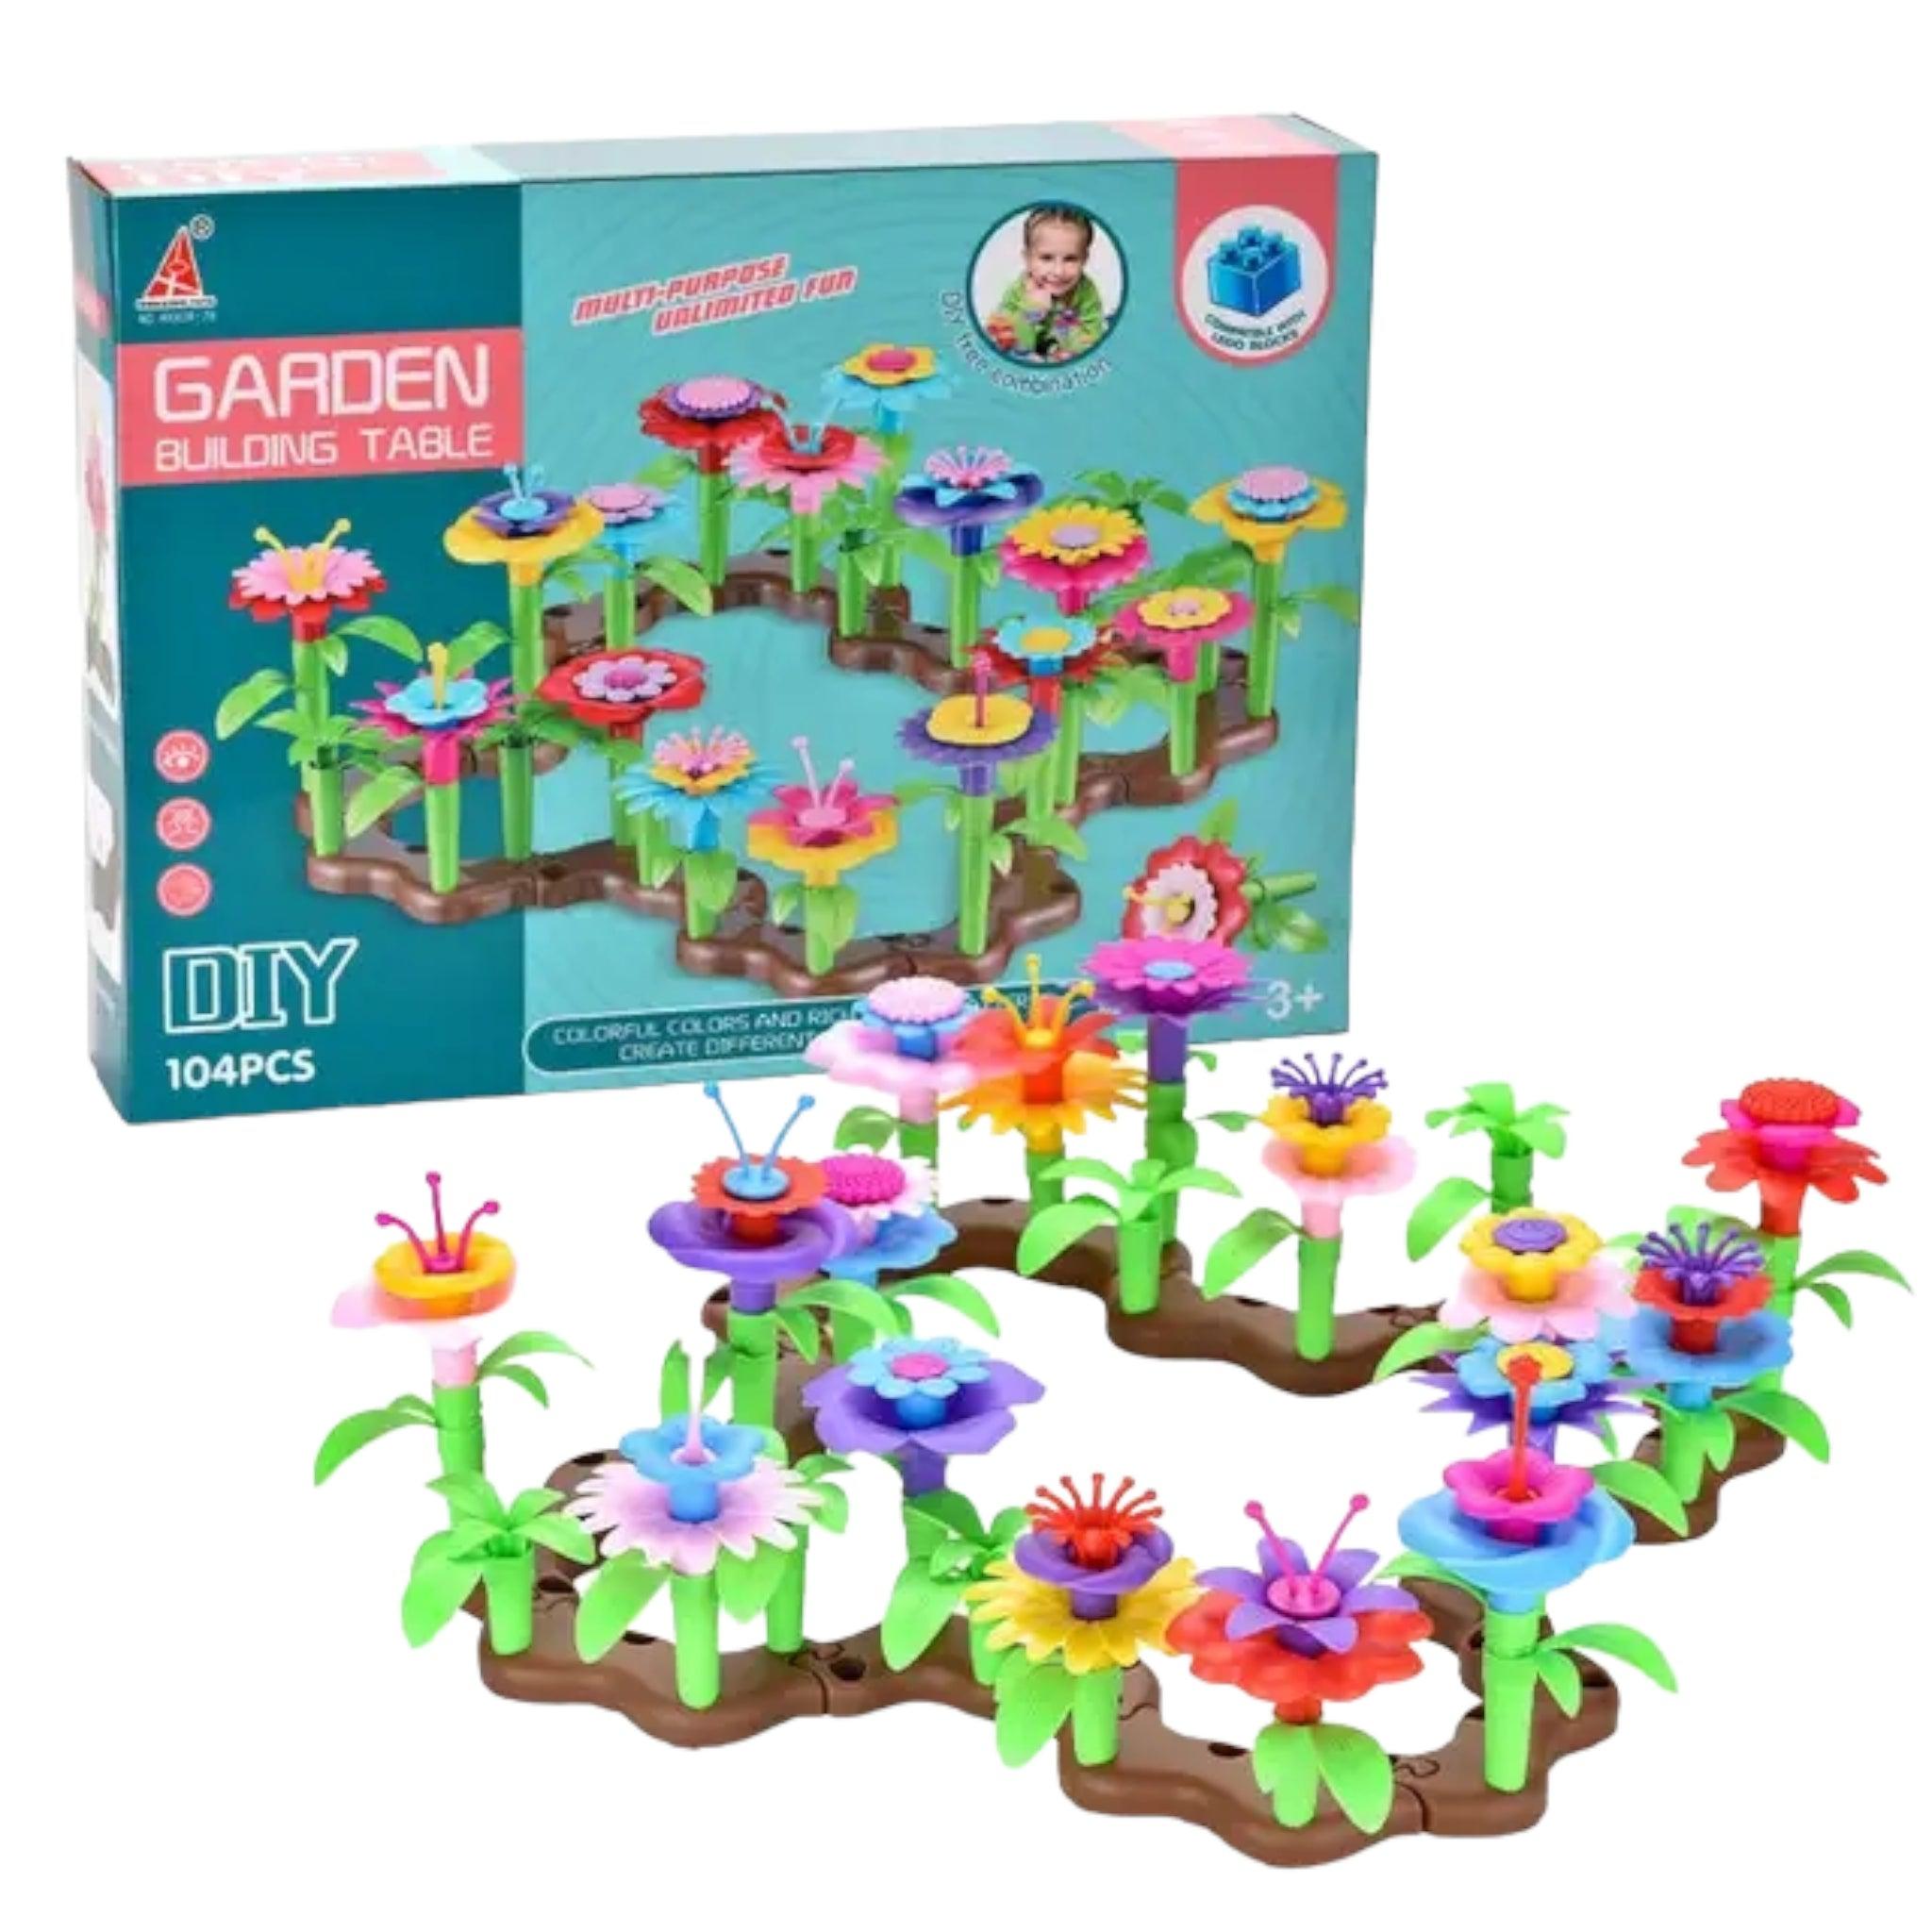 Flower Building Blocks For Kids And Toddlers Boys And Girls 104 PCS Garden Building Table